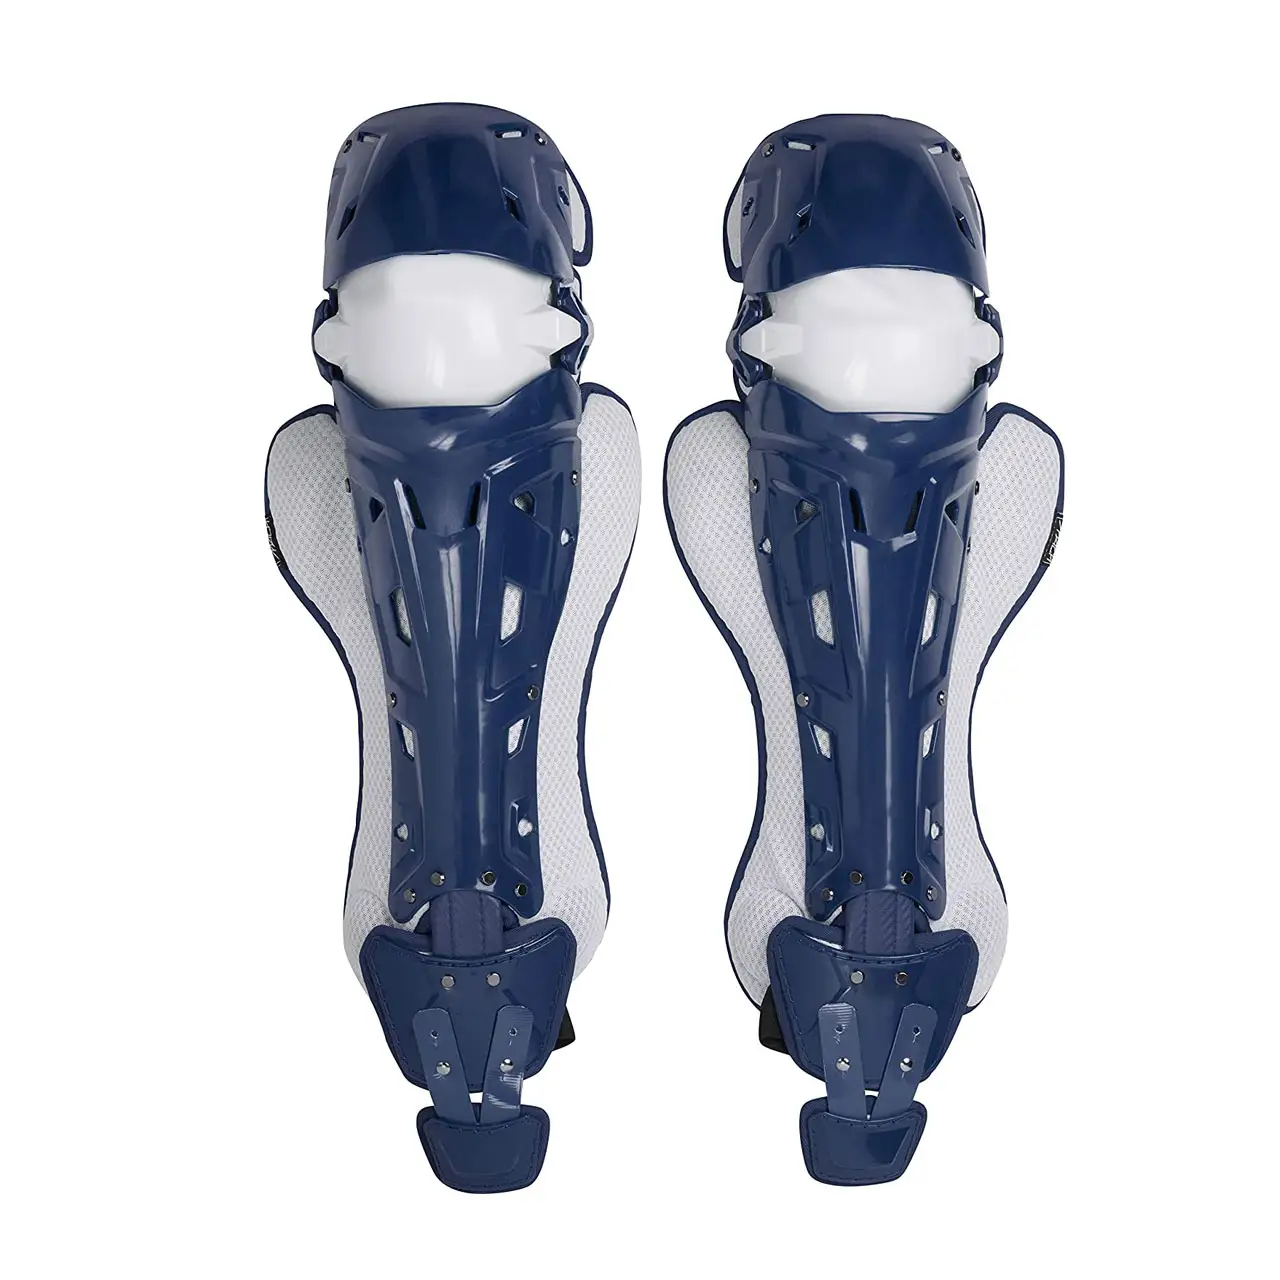 Leg Guards Pads Support Riding Leg Protection for Children Teens Adult Competition Baseball Catcher's Leg Guards Series